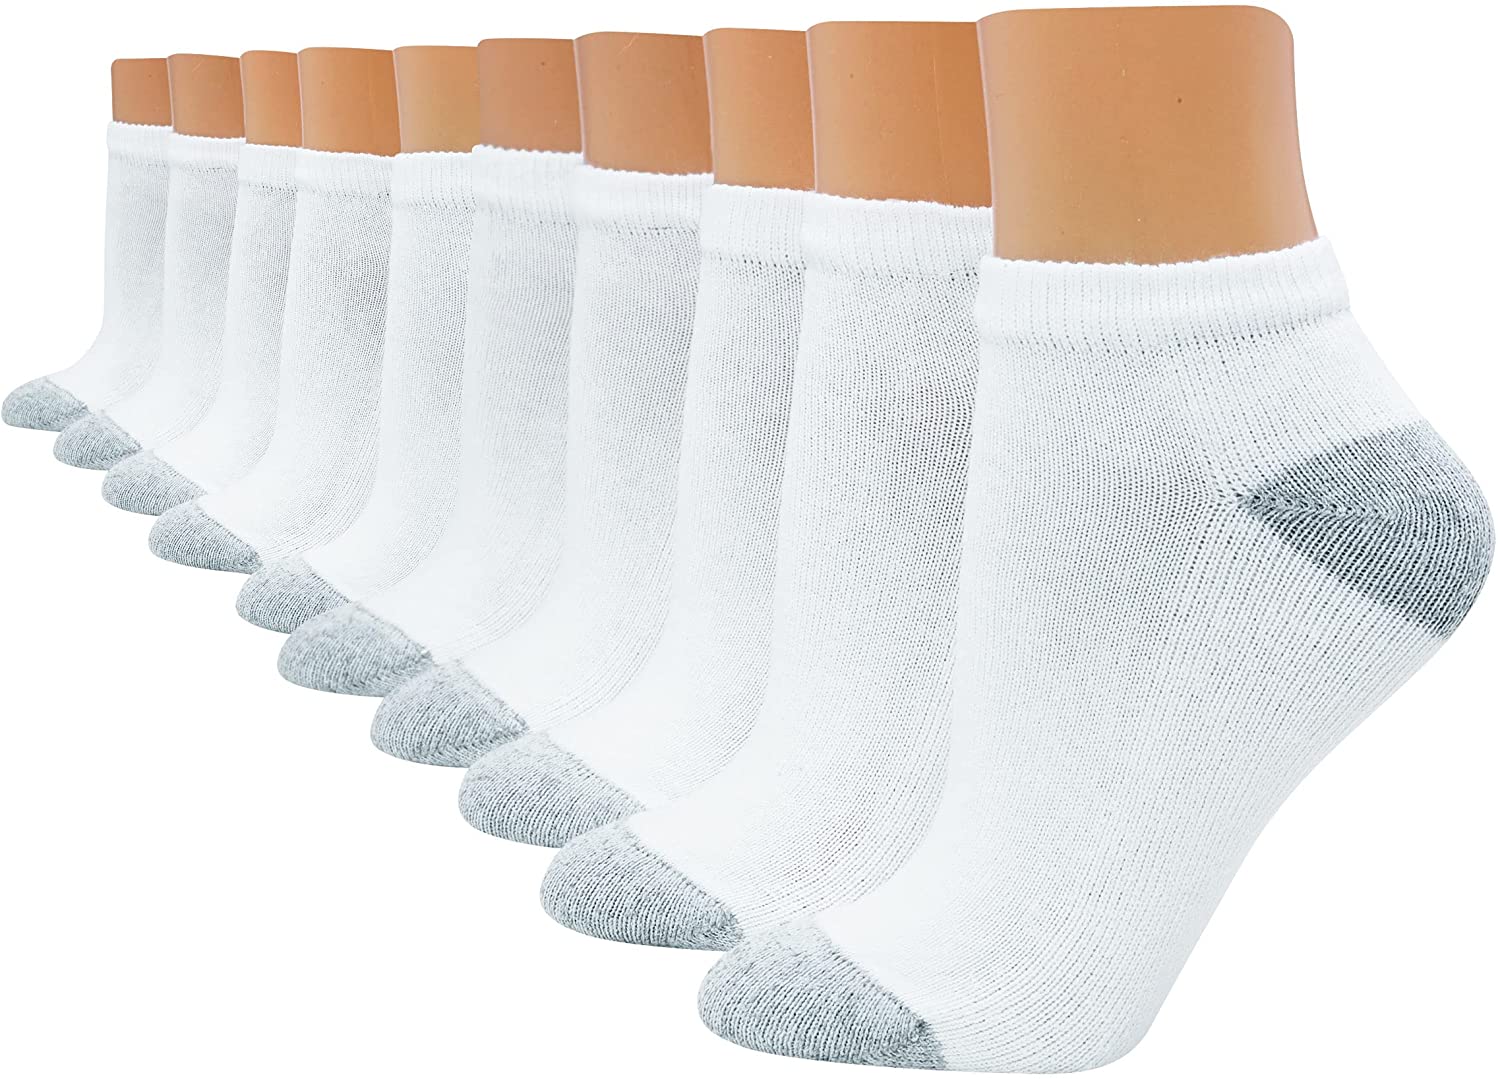 Hanes Cushioned Women's Ankle Athletic Socks 10-Pack 